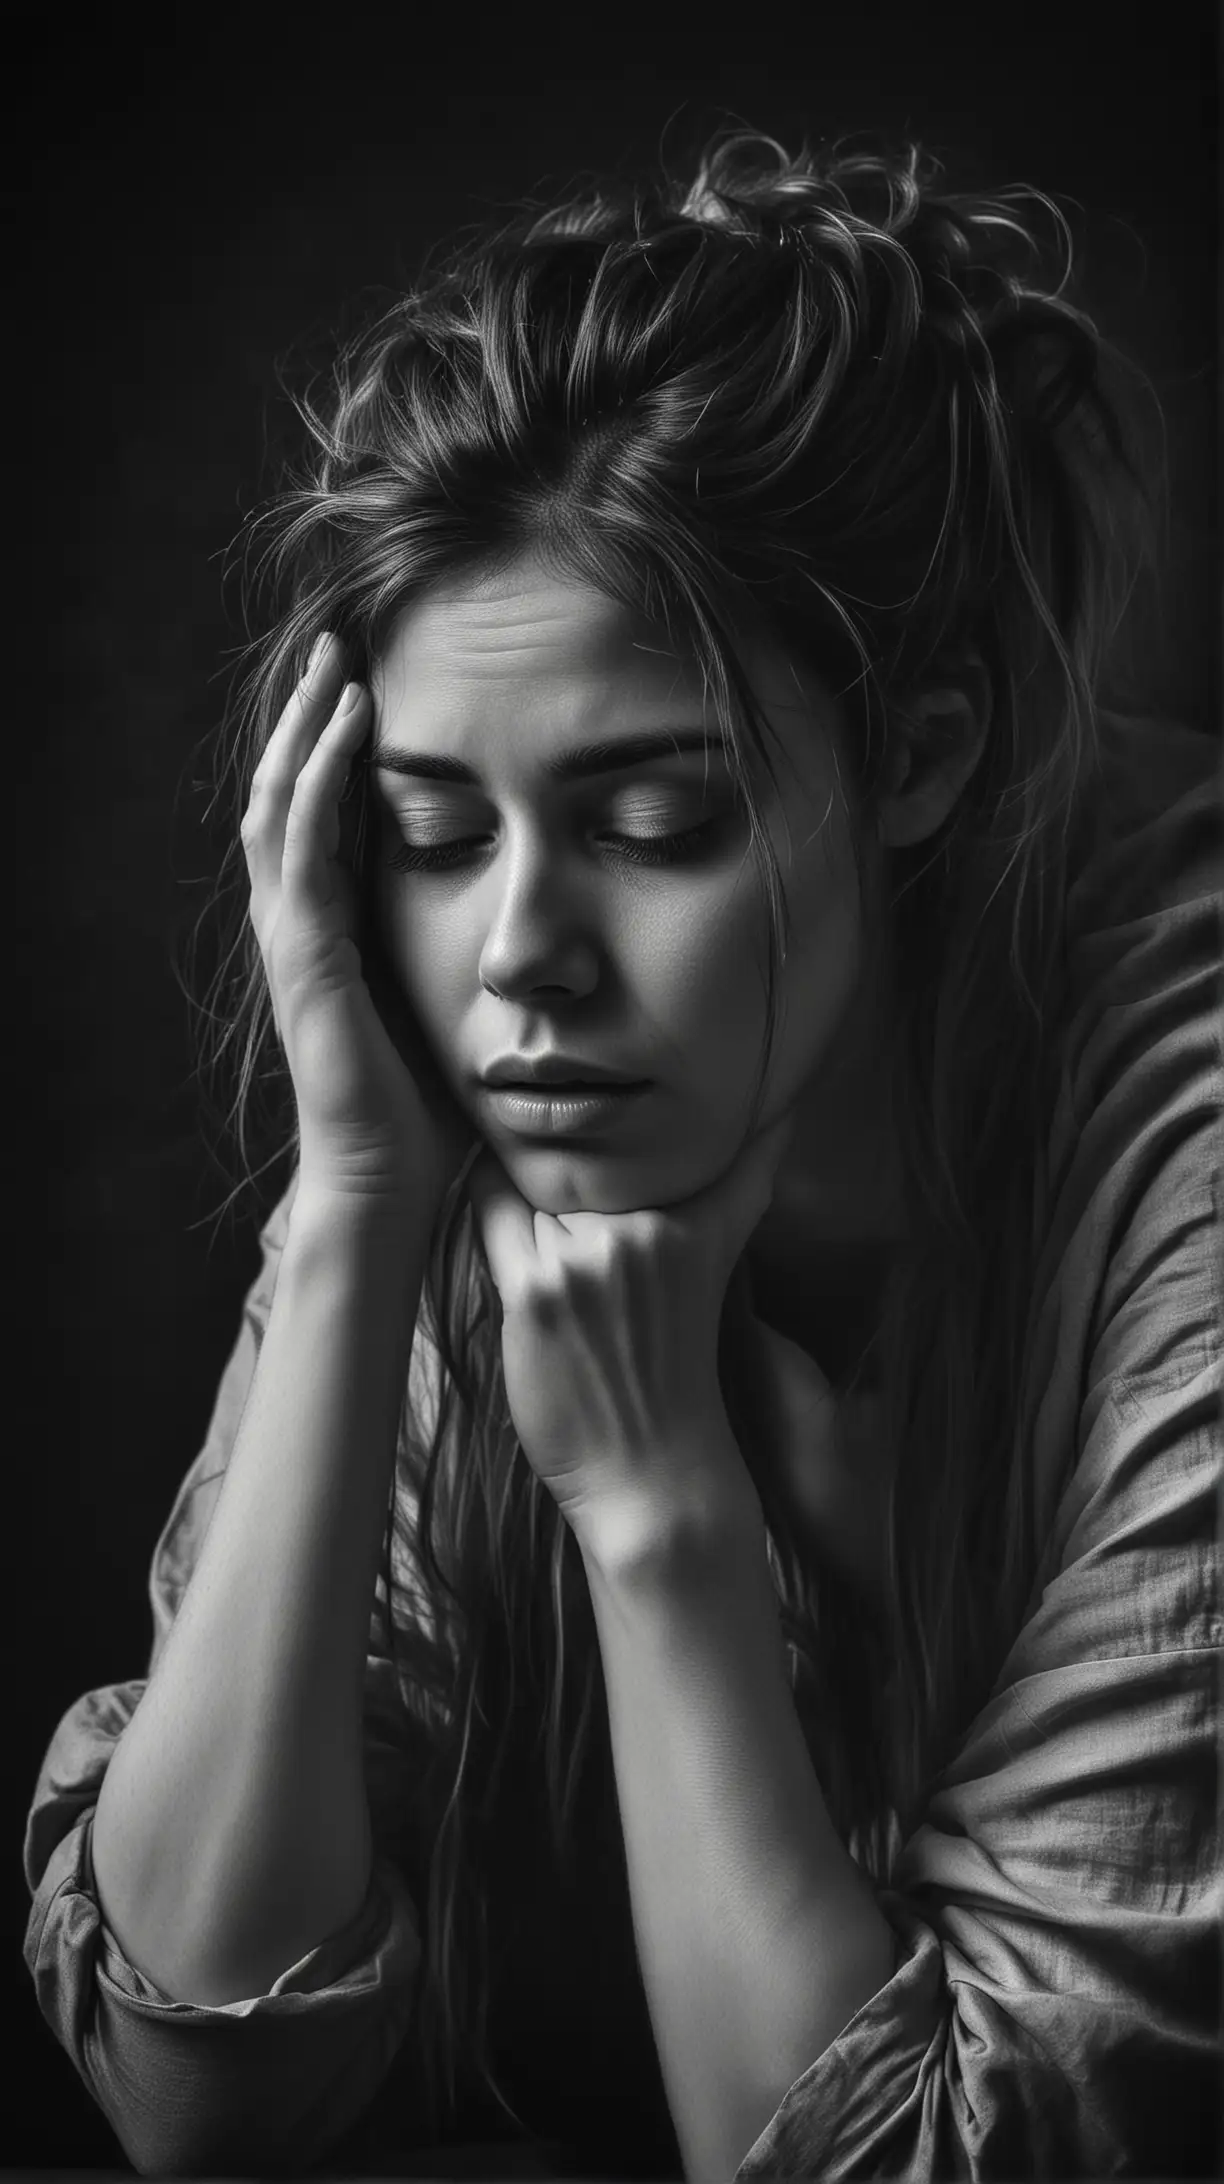 Profile picture of a neurotic person sitting in a dark space, holding her head in her hands and deep in thought with her hair sticking out from her fingers.
black and white artistic realistic photography
Render this scene as a highly stylized, almost painterly digital illustration with careful attention to lighting, textures and muted colors. The lack of literal representation allows the deeper emotional resonance to take precedence.